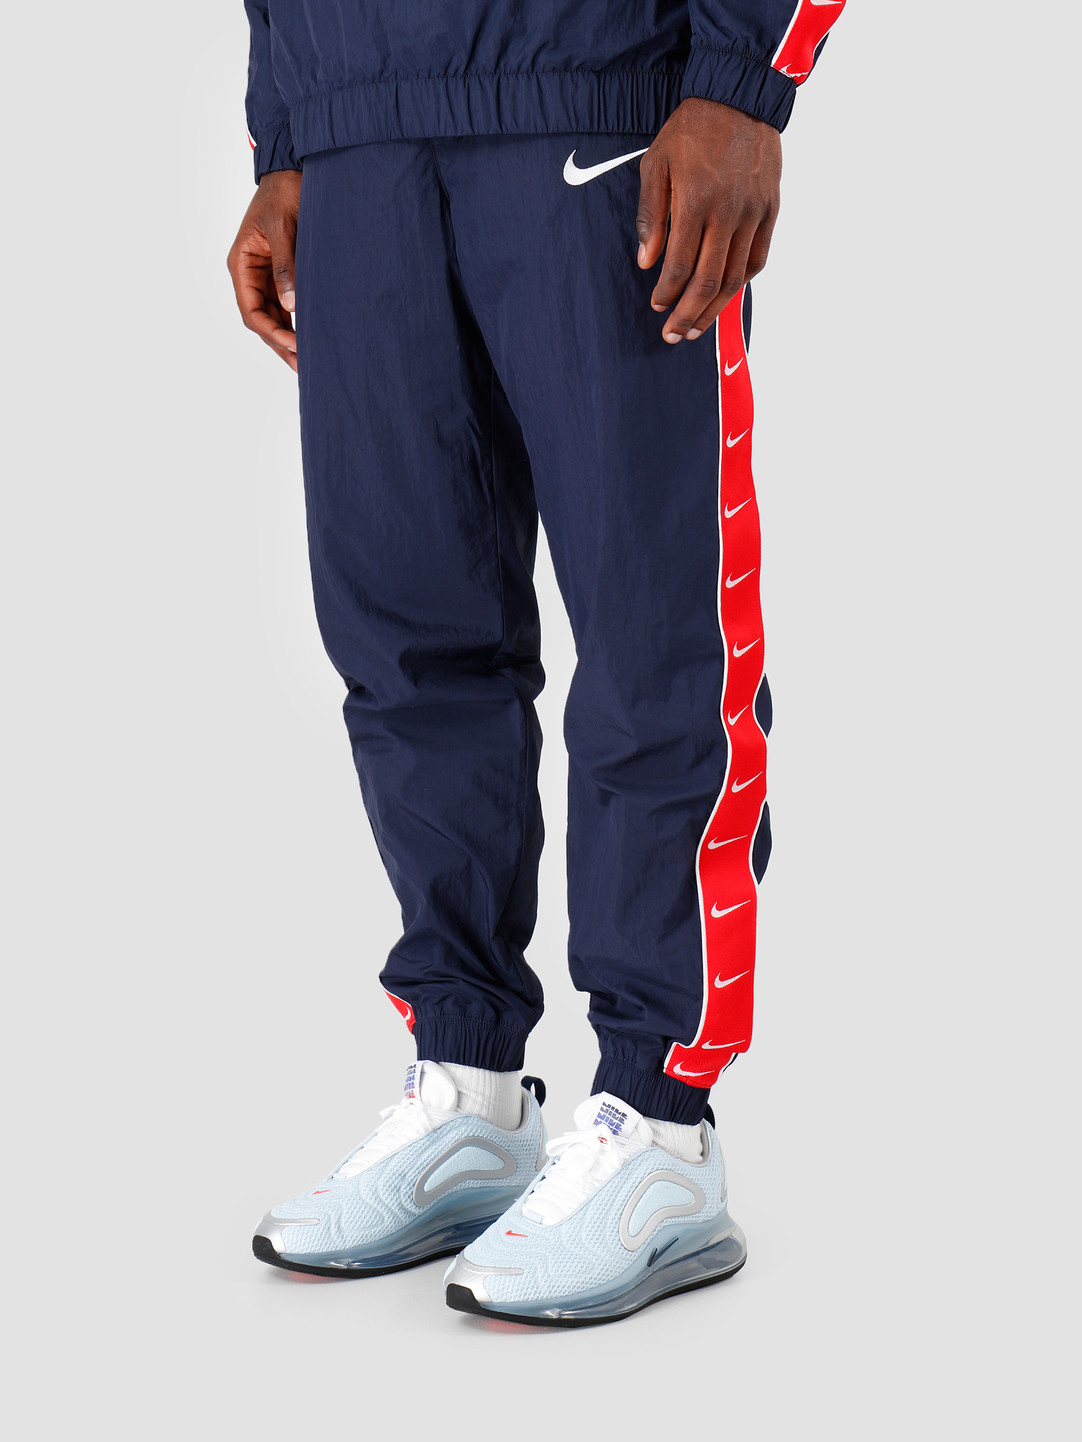 red and blue nike pants